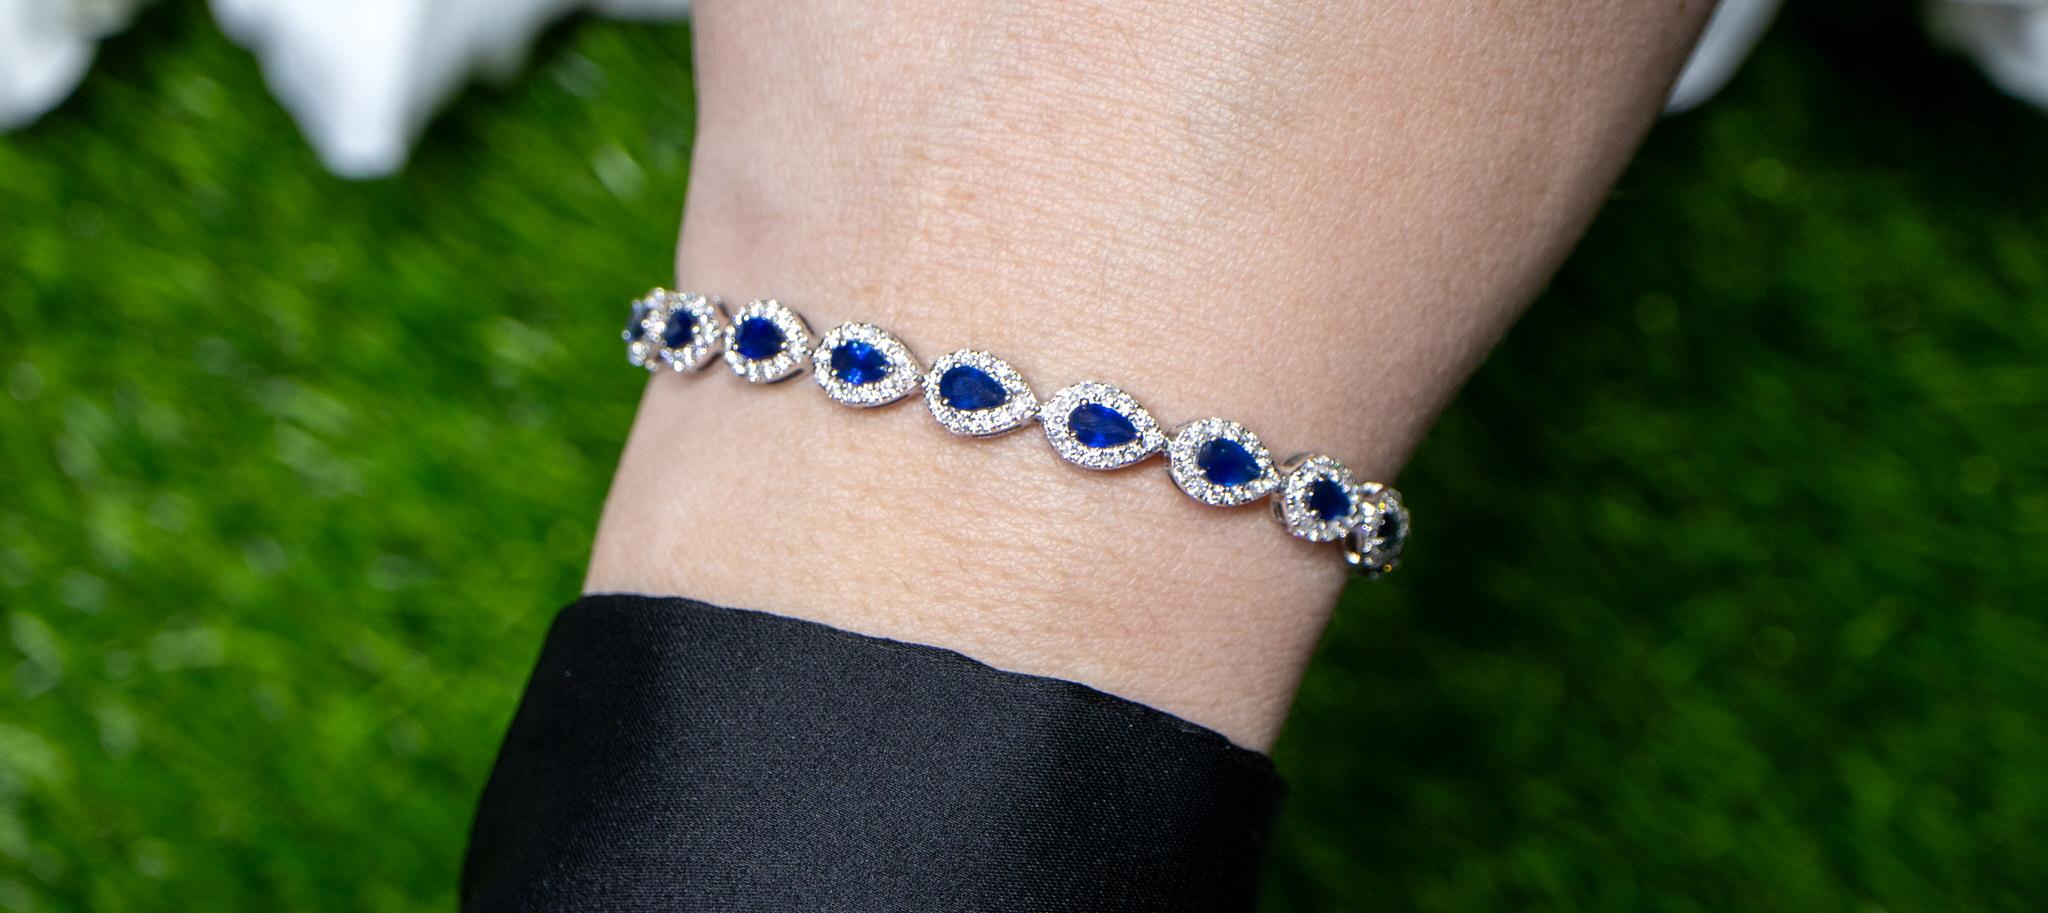 Blue Pear Cut Sapphire Bracelet Diamond Halo 6.94 Carats 18K Gold In Excellent Condition For Sale In Laguna Niguel, CA